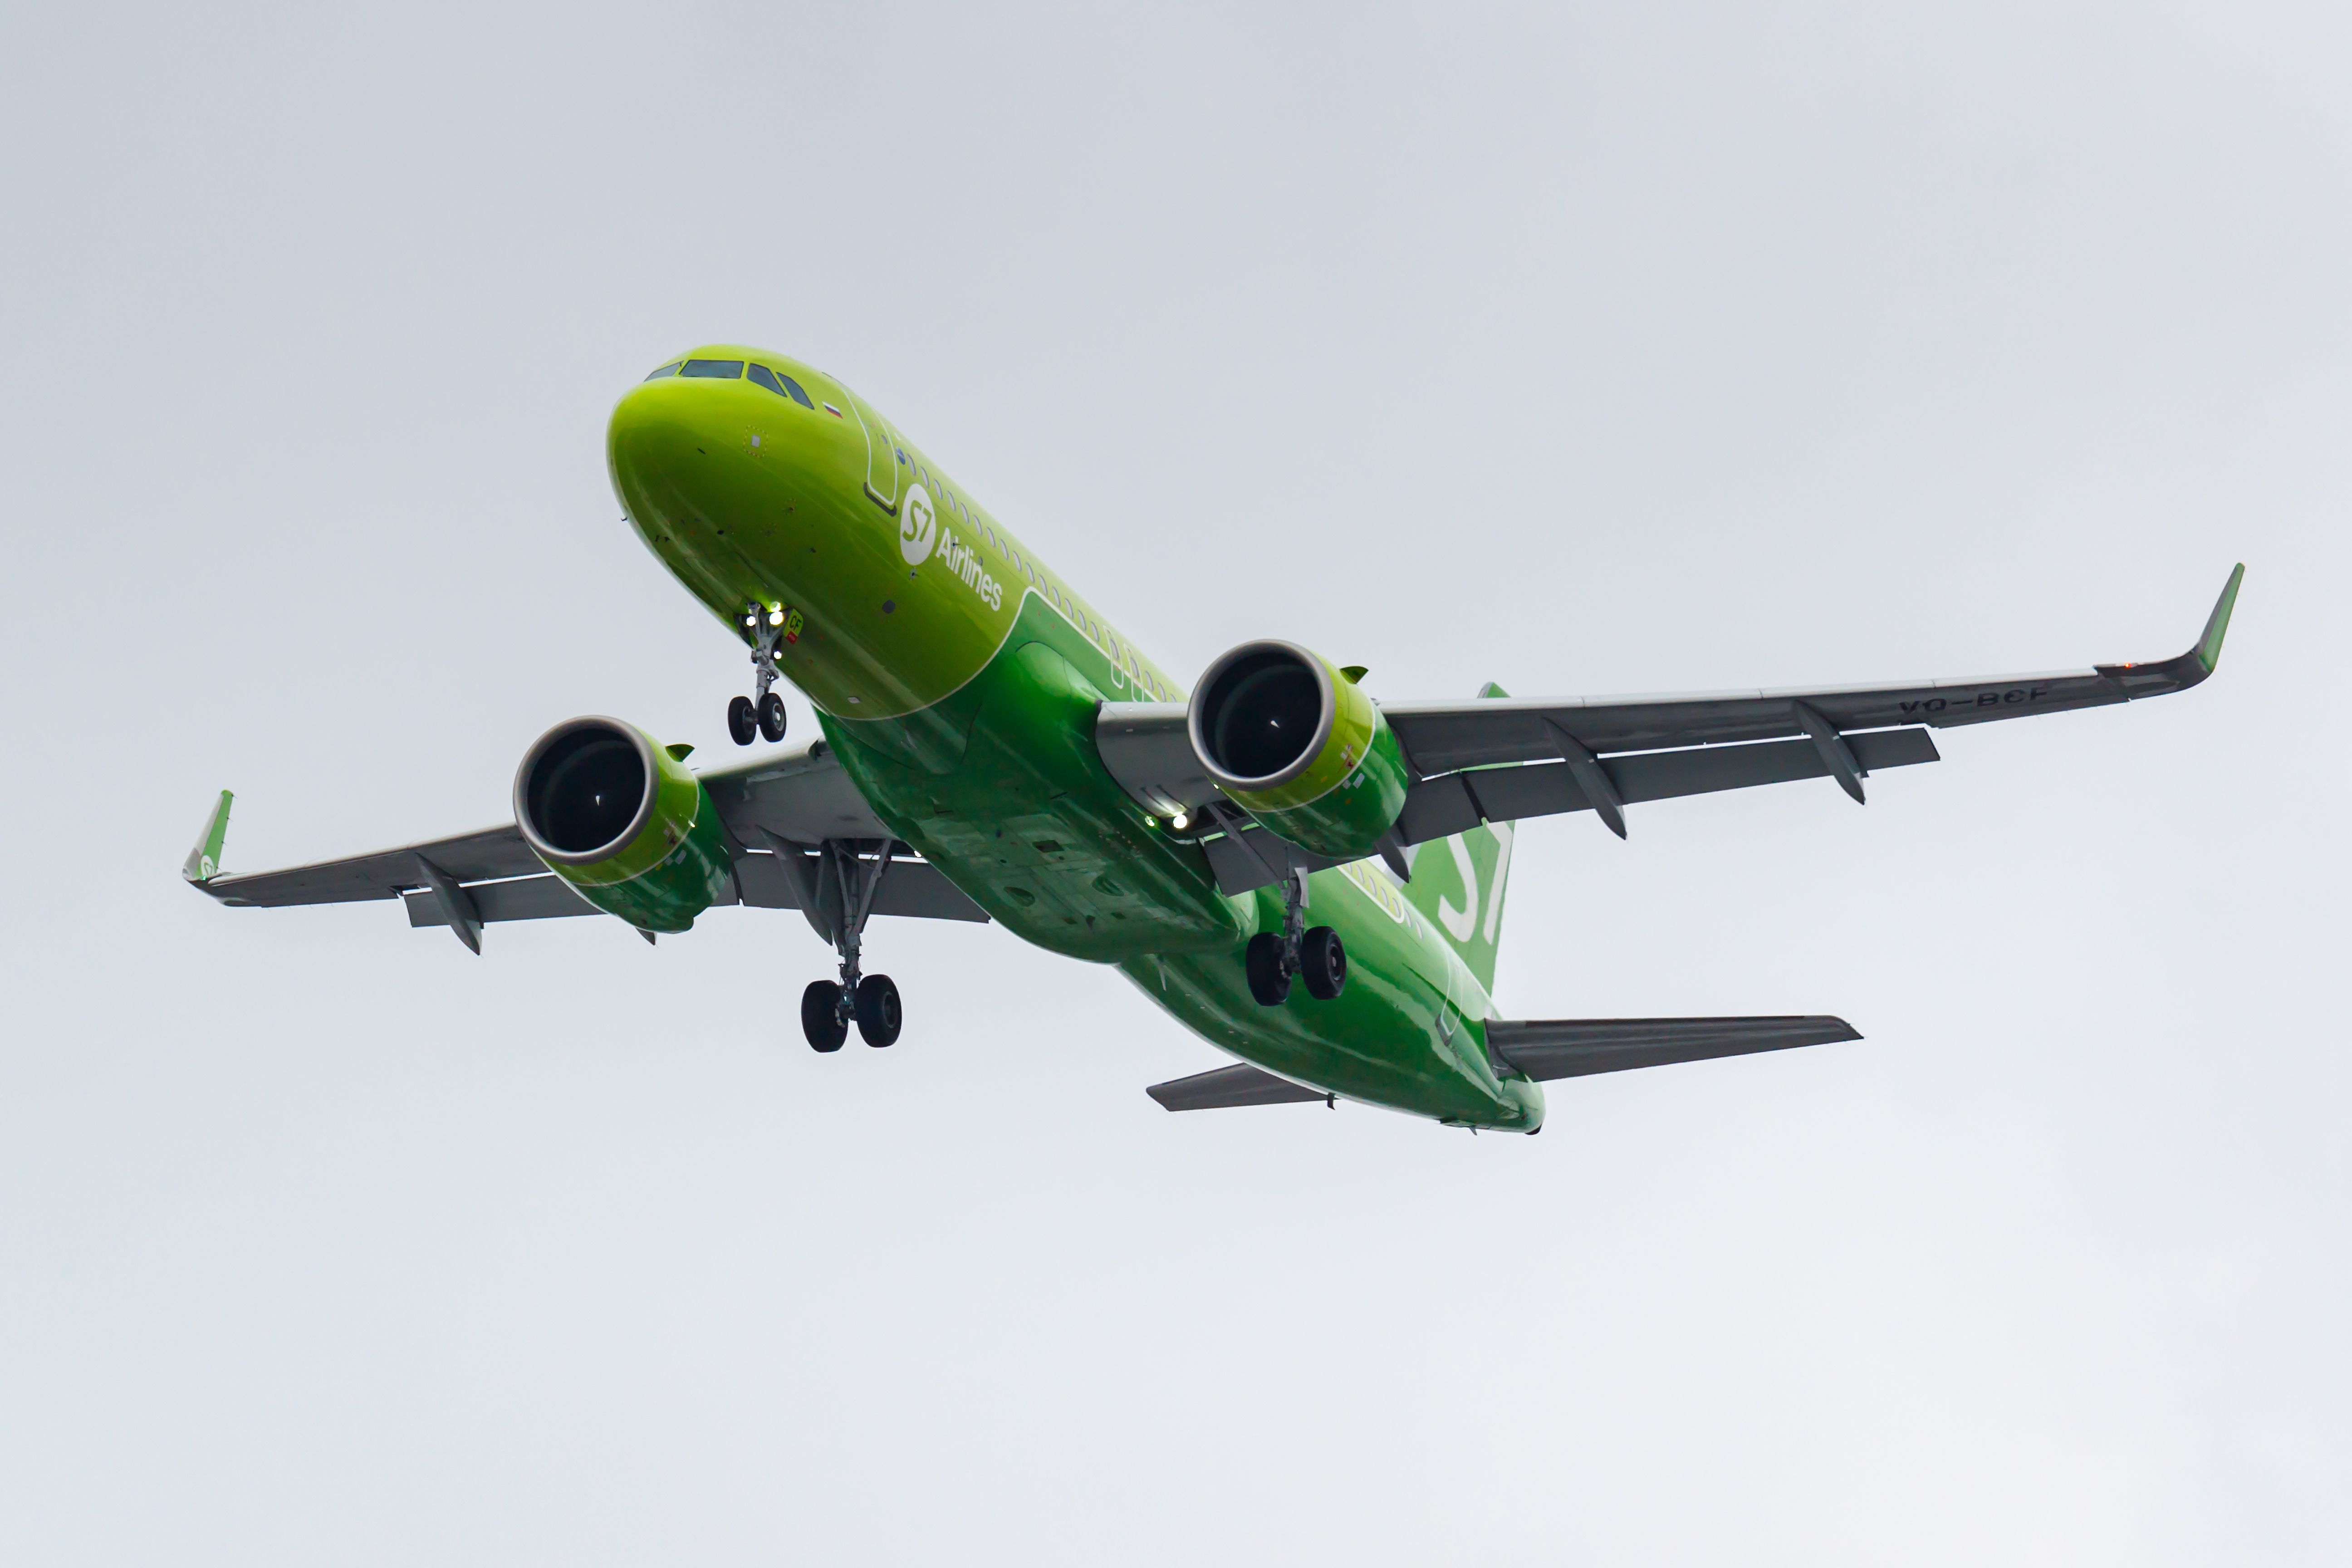 An S7 Airlines Airbus A320neo flying in the sky.